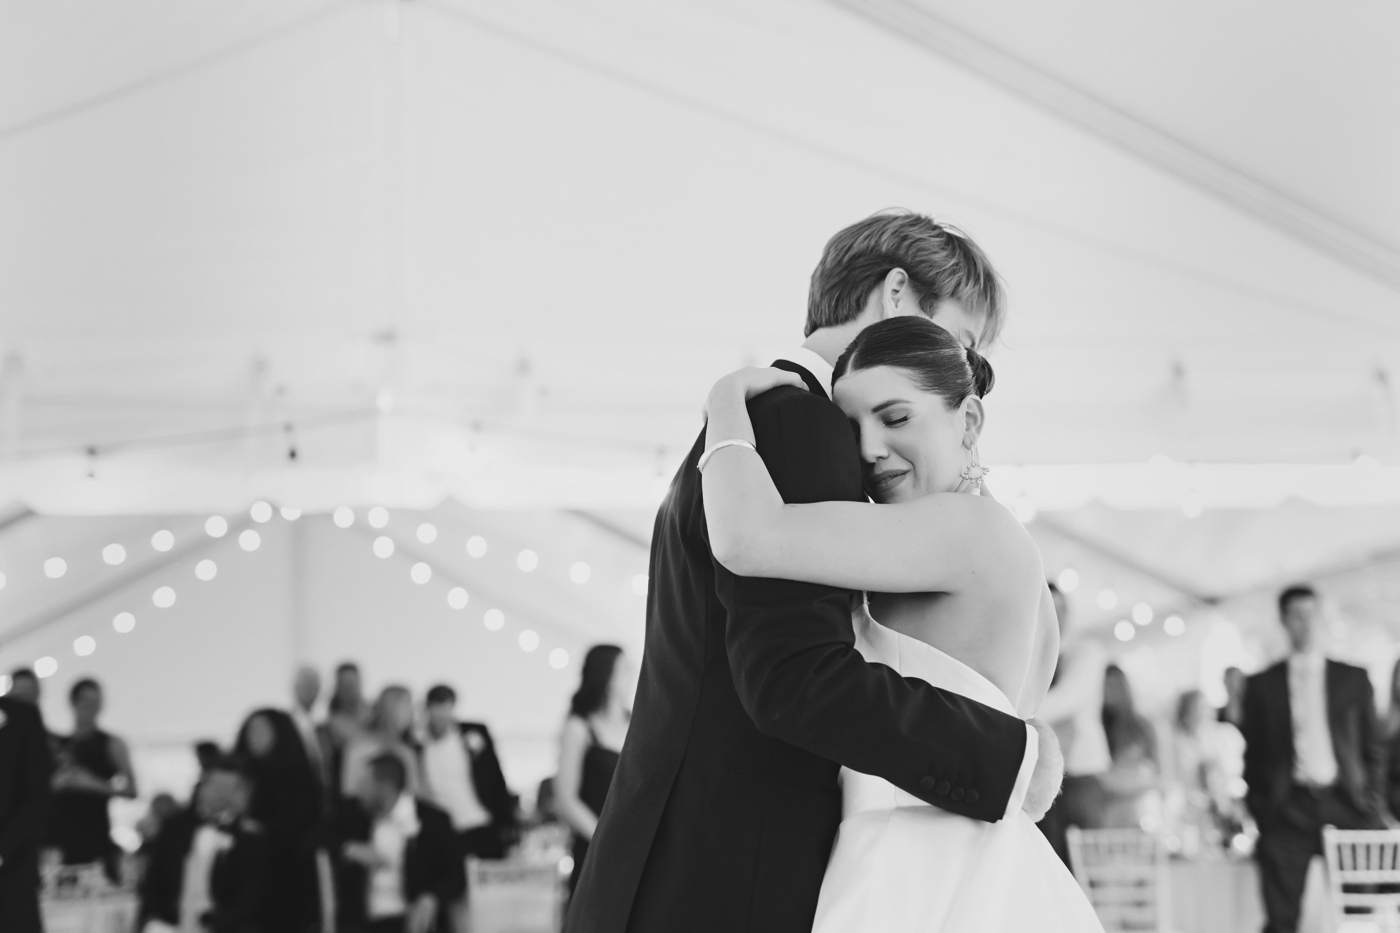 Bride and groom first dance at a tented wedding at Tarry House